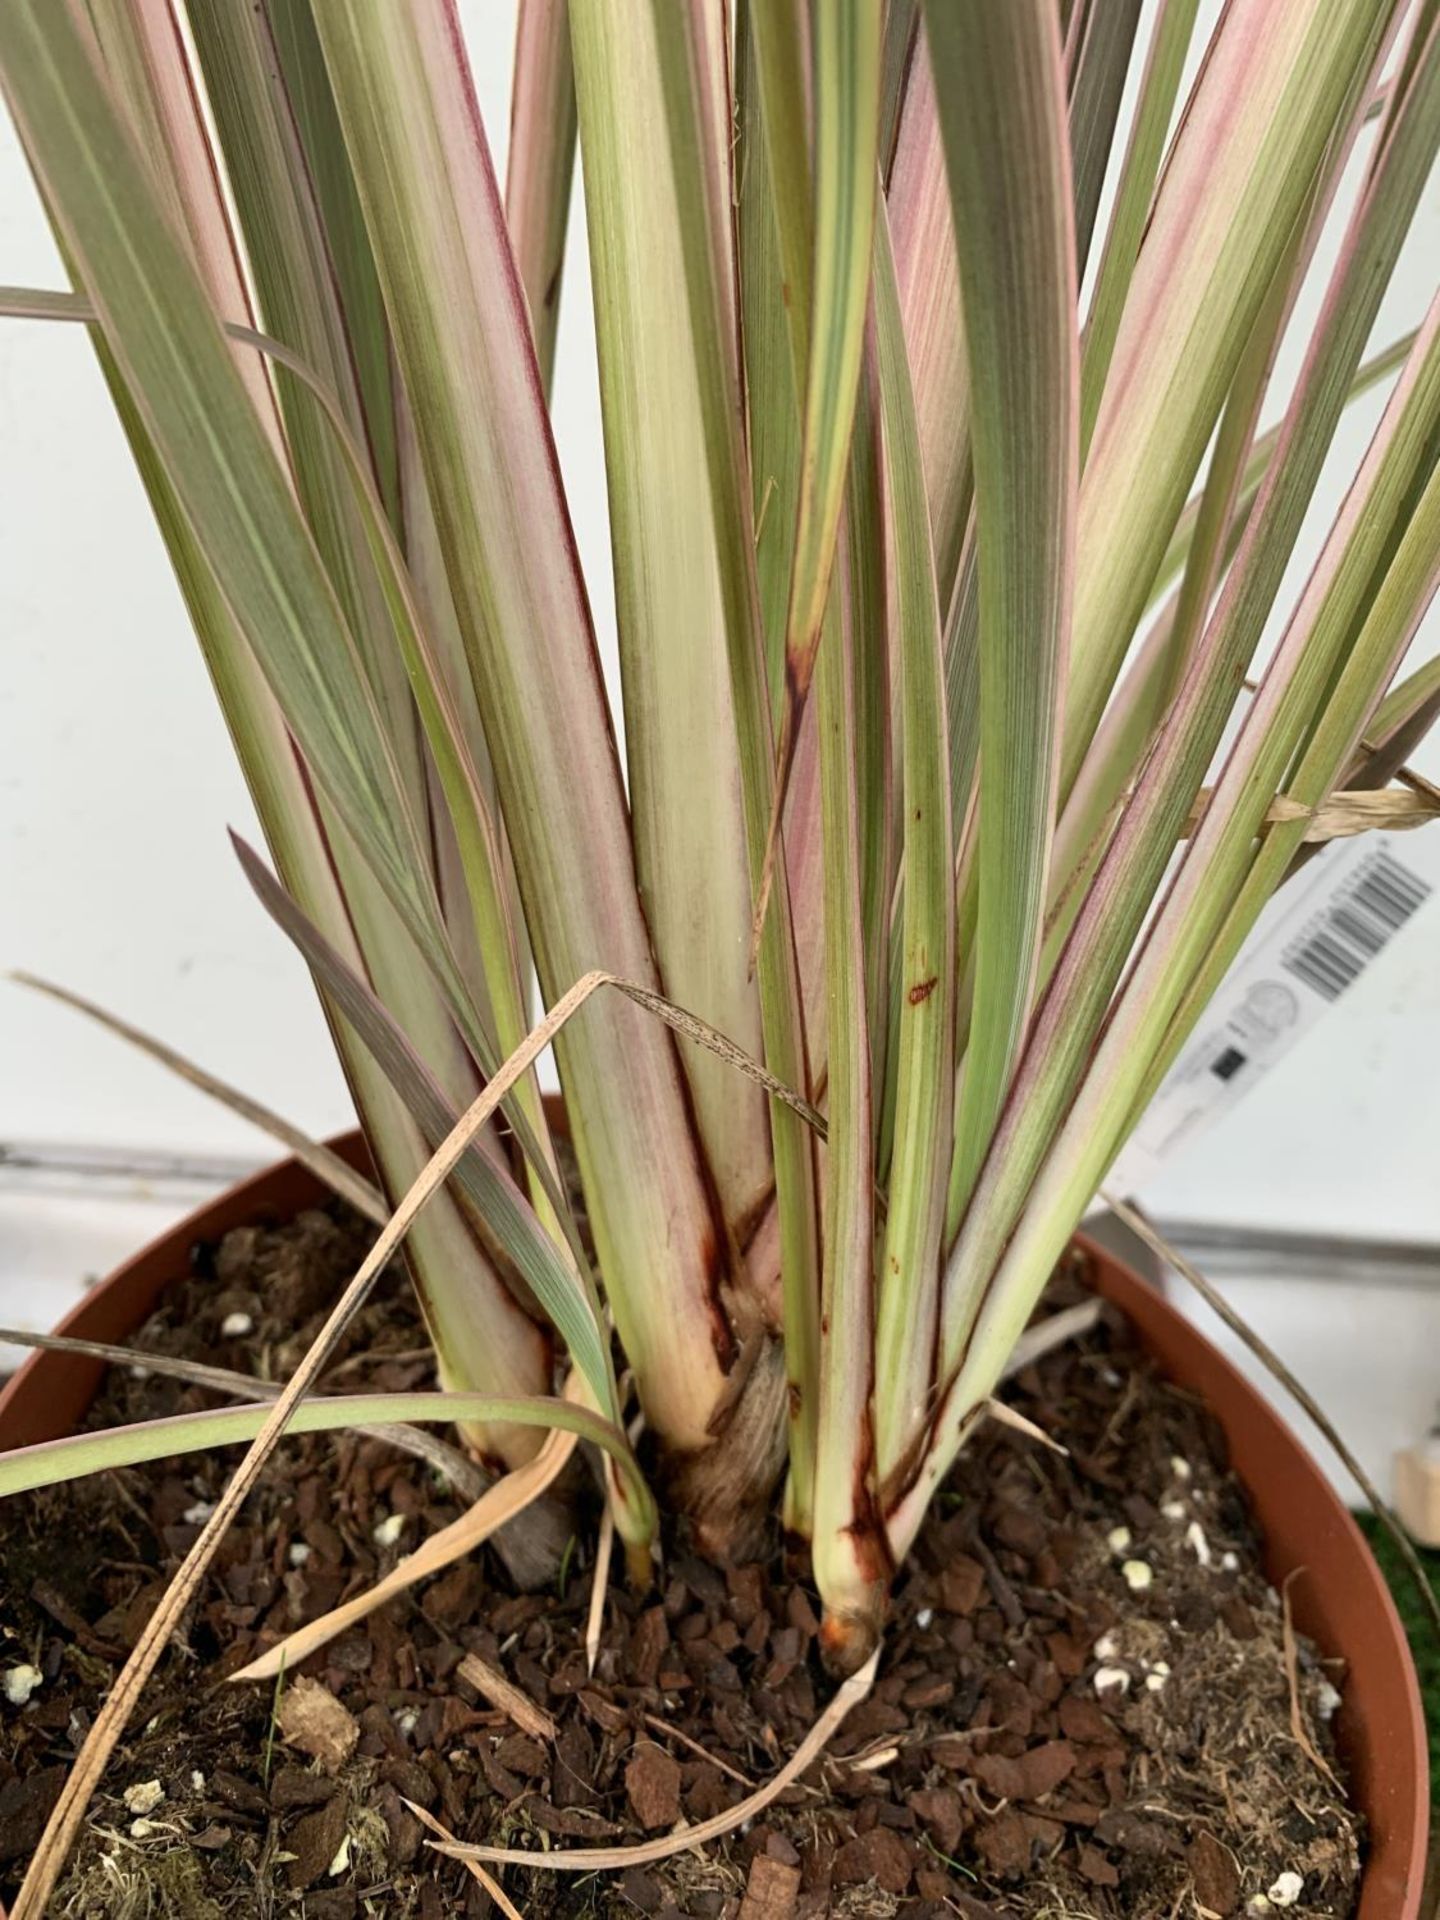 TWO PHORMIUM TENAX 'CREAM DELIGHT' AND 'PINK STRIPE' IN 3 LTR POTS OVER 1 METRE IN HEIGHT PLUS VAT - Image 3 of 6